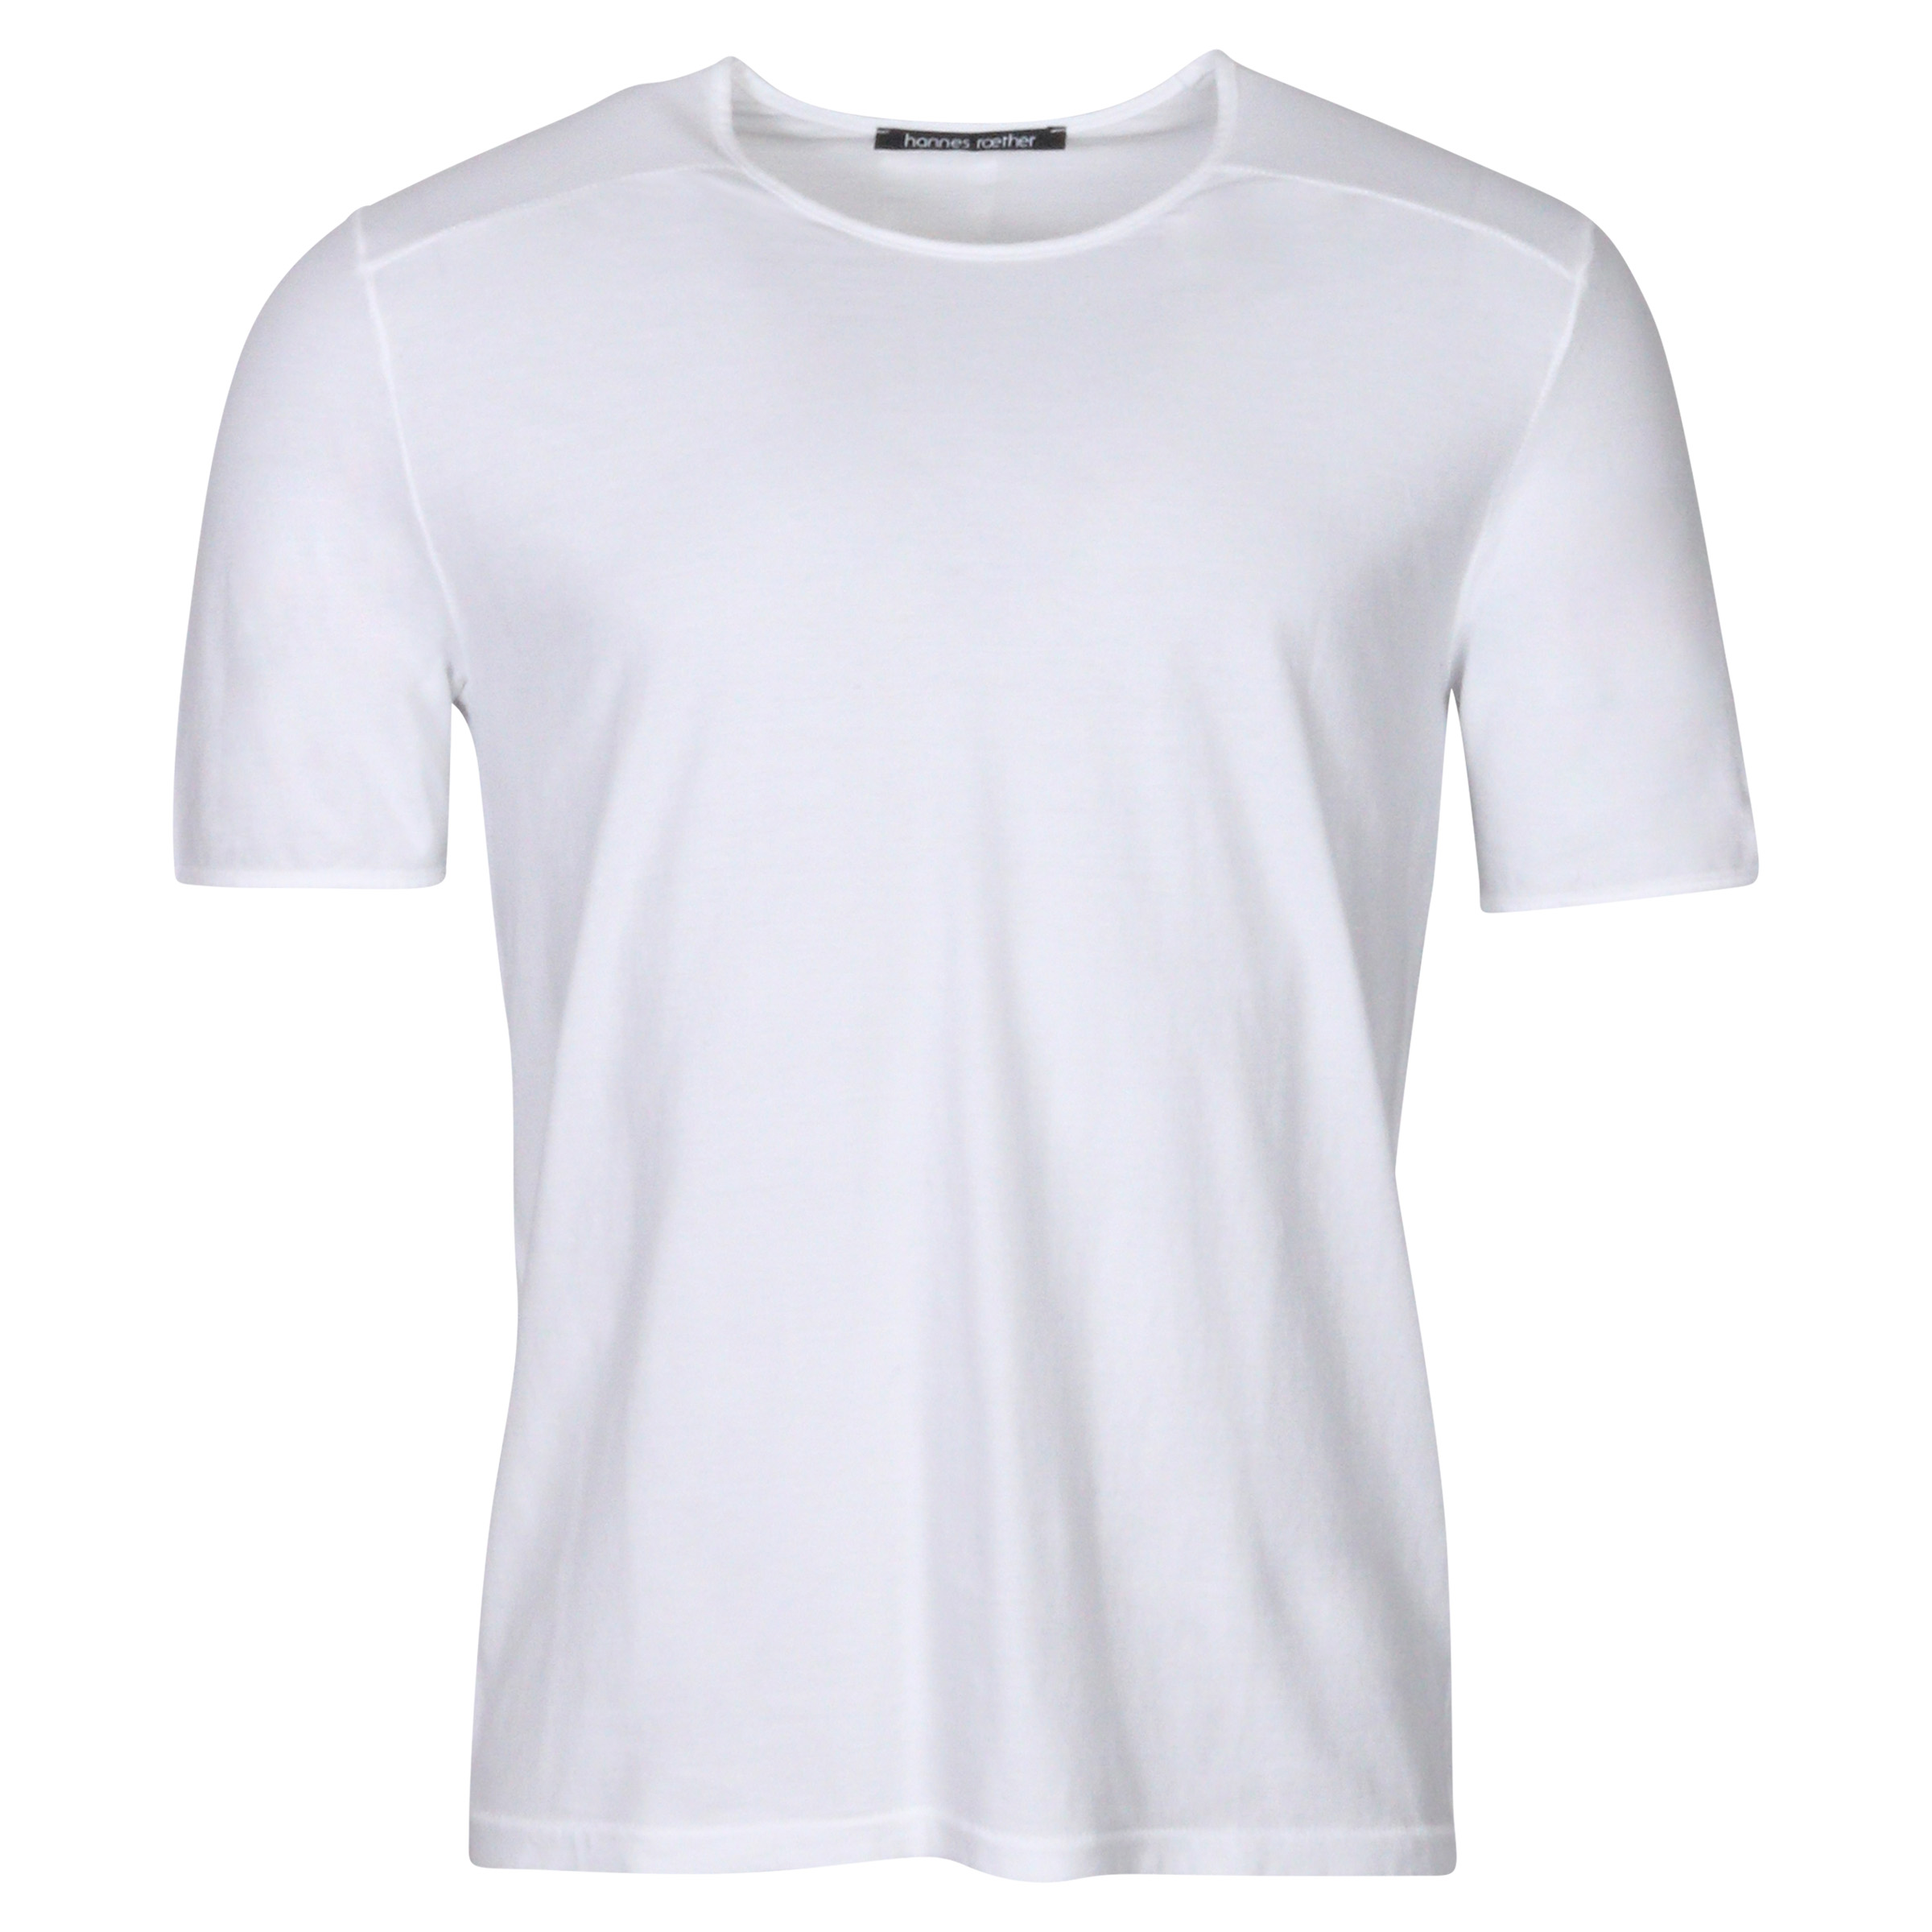 Hannes Roether T-Shirt White XL